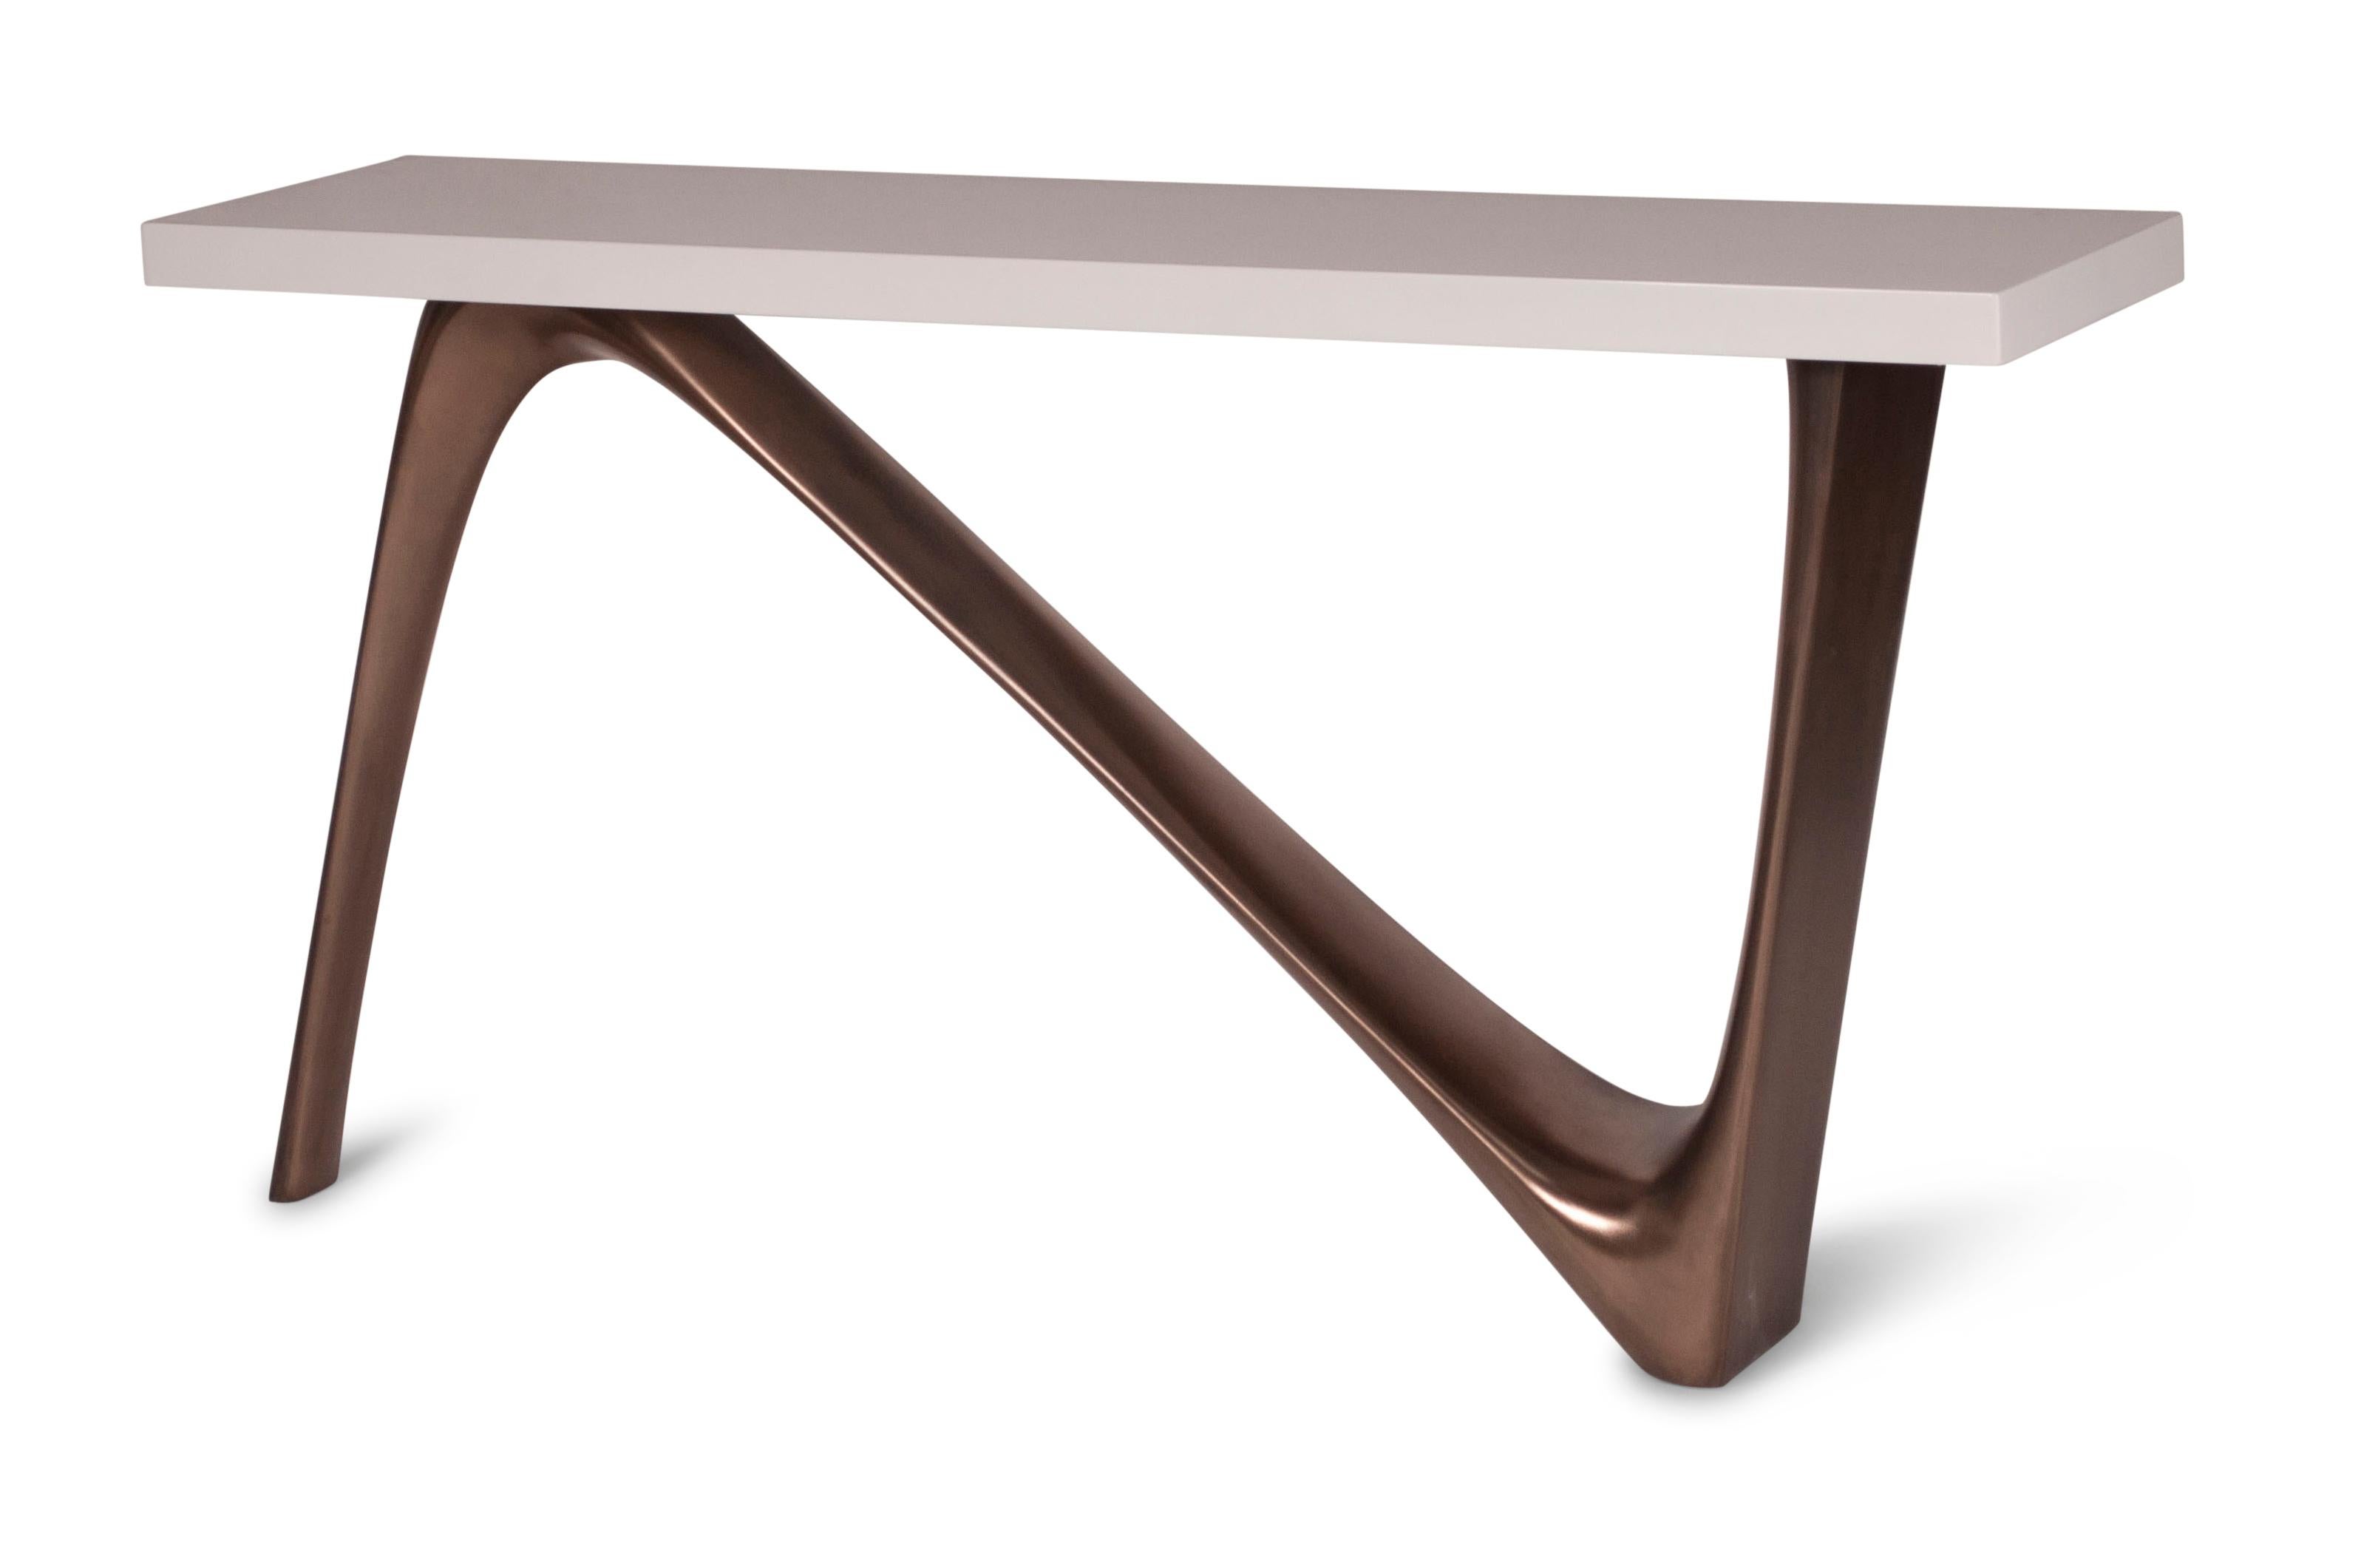 Aviva Console table is organic shape console. the dimension is 60